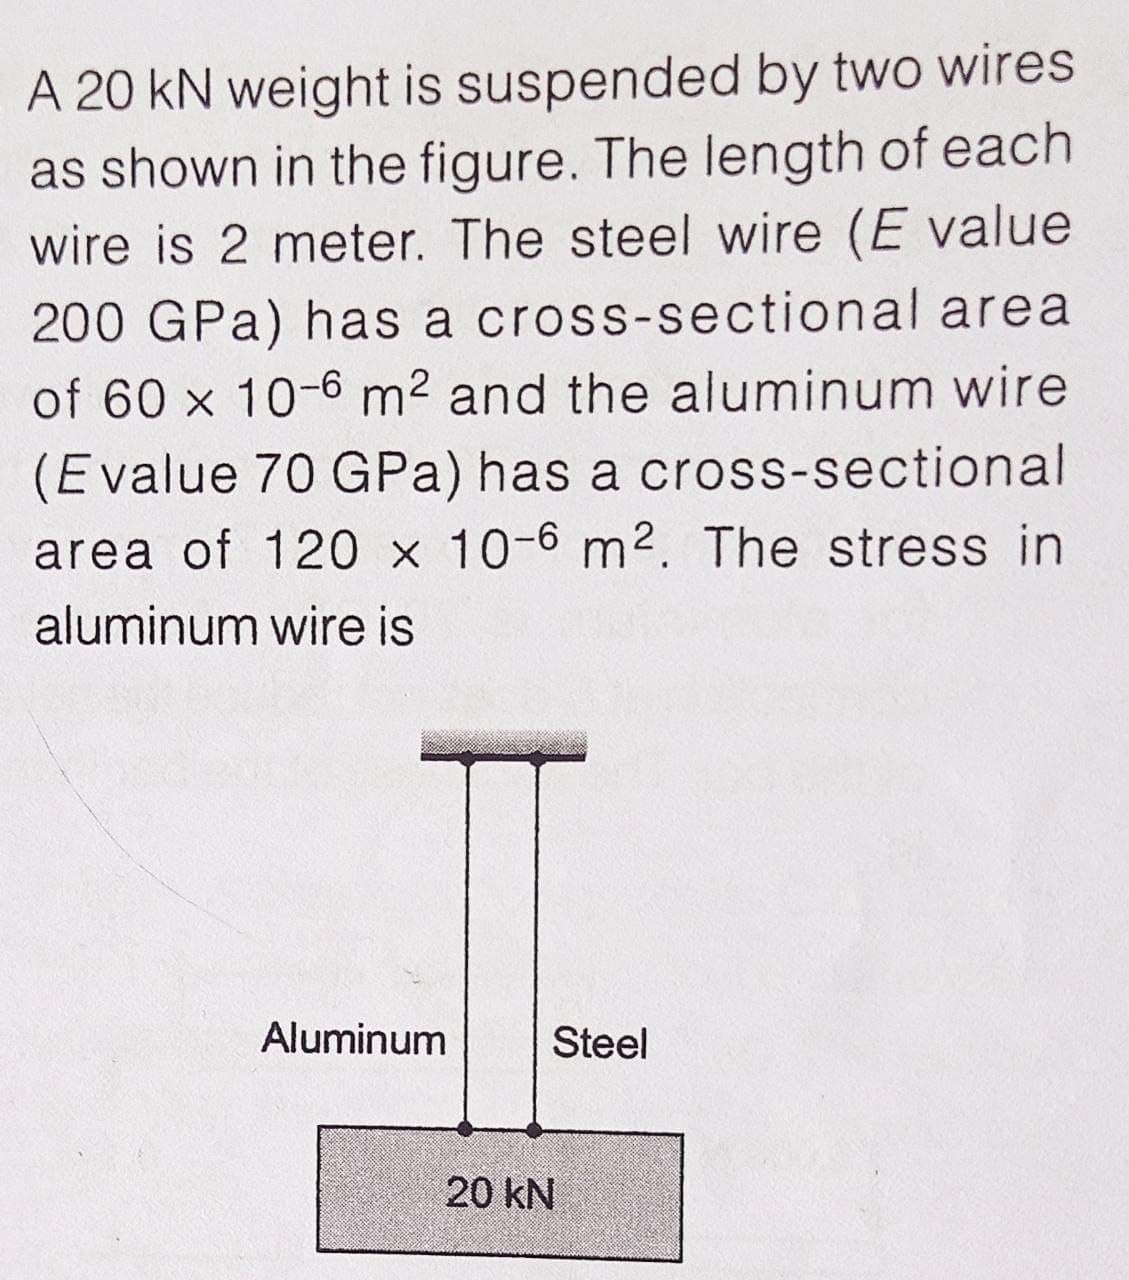 A 20 KN weight is suspended by two wires
as shown in the figure. The length of each
wire is 2 meter. The steel wire (E value
200 GPa) has a cross-sectional area
of 60 x 10-6 m² and the aluminum wire
(Evalue 70 GPa) has a cross-sectional
area of 120 x 10-6 m². The stress in
aluminum wire is
Aluminum
Steel
20 kN